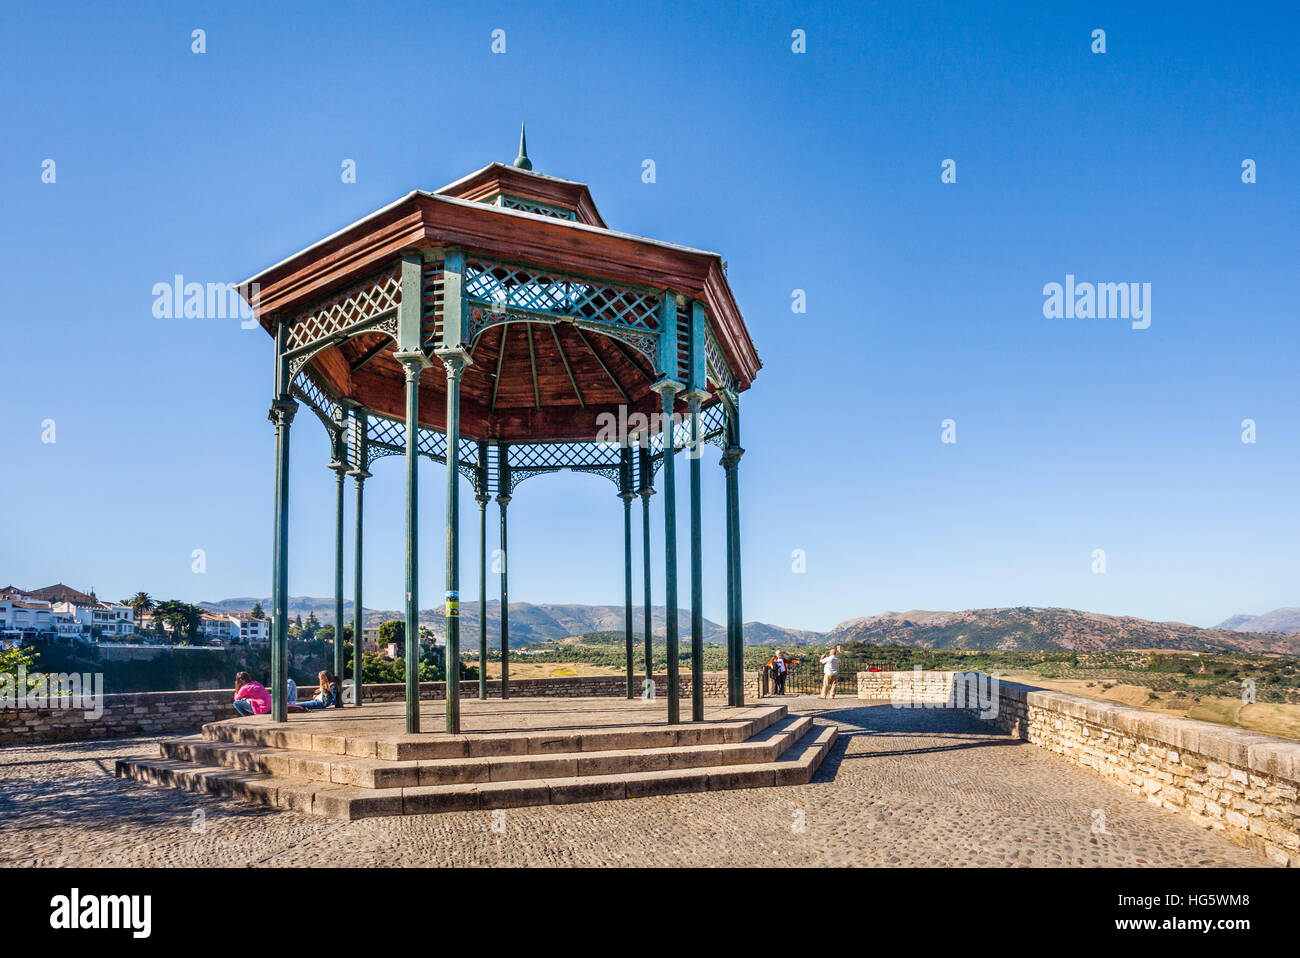 Spain, Andalusia, Province of Malaga, Ronda, view of the countryside and the surrounding Sierras from Mirador de Ronda, Alameda del Tajo Stock Photo